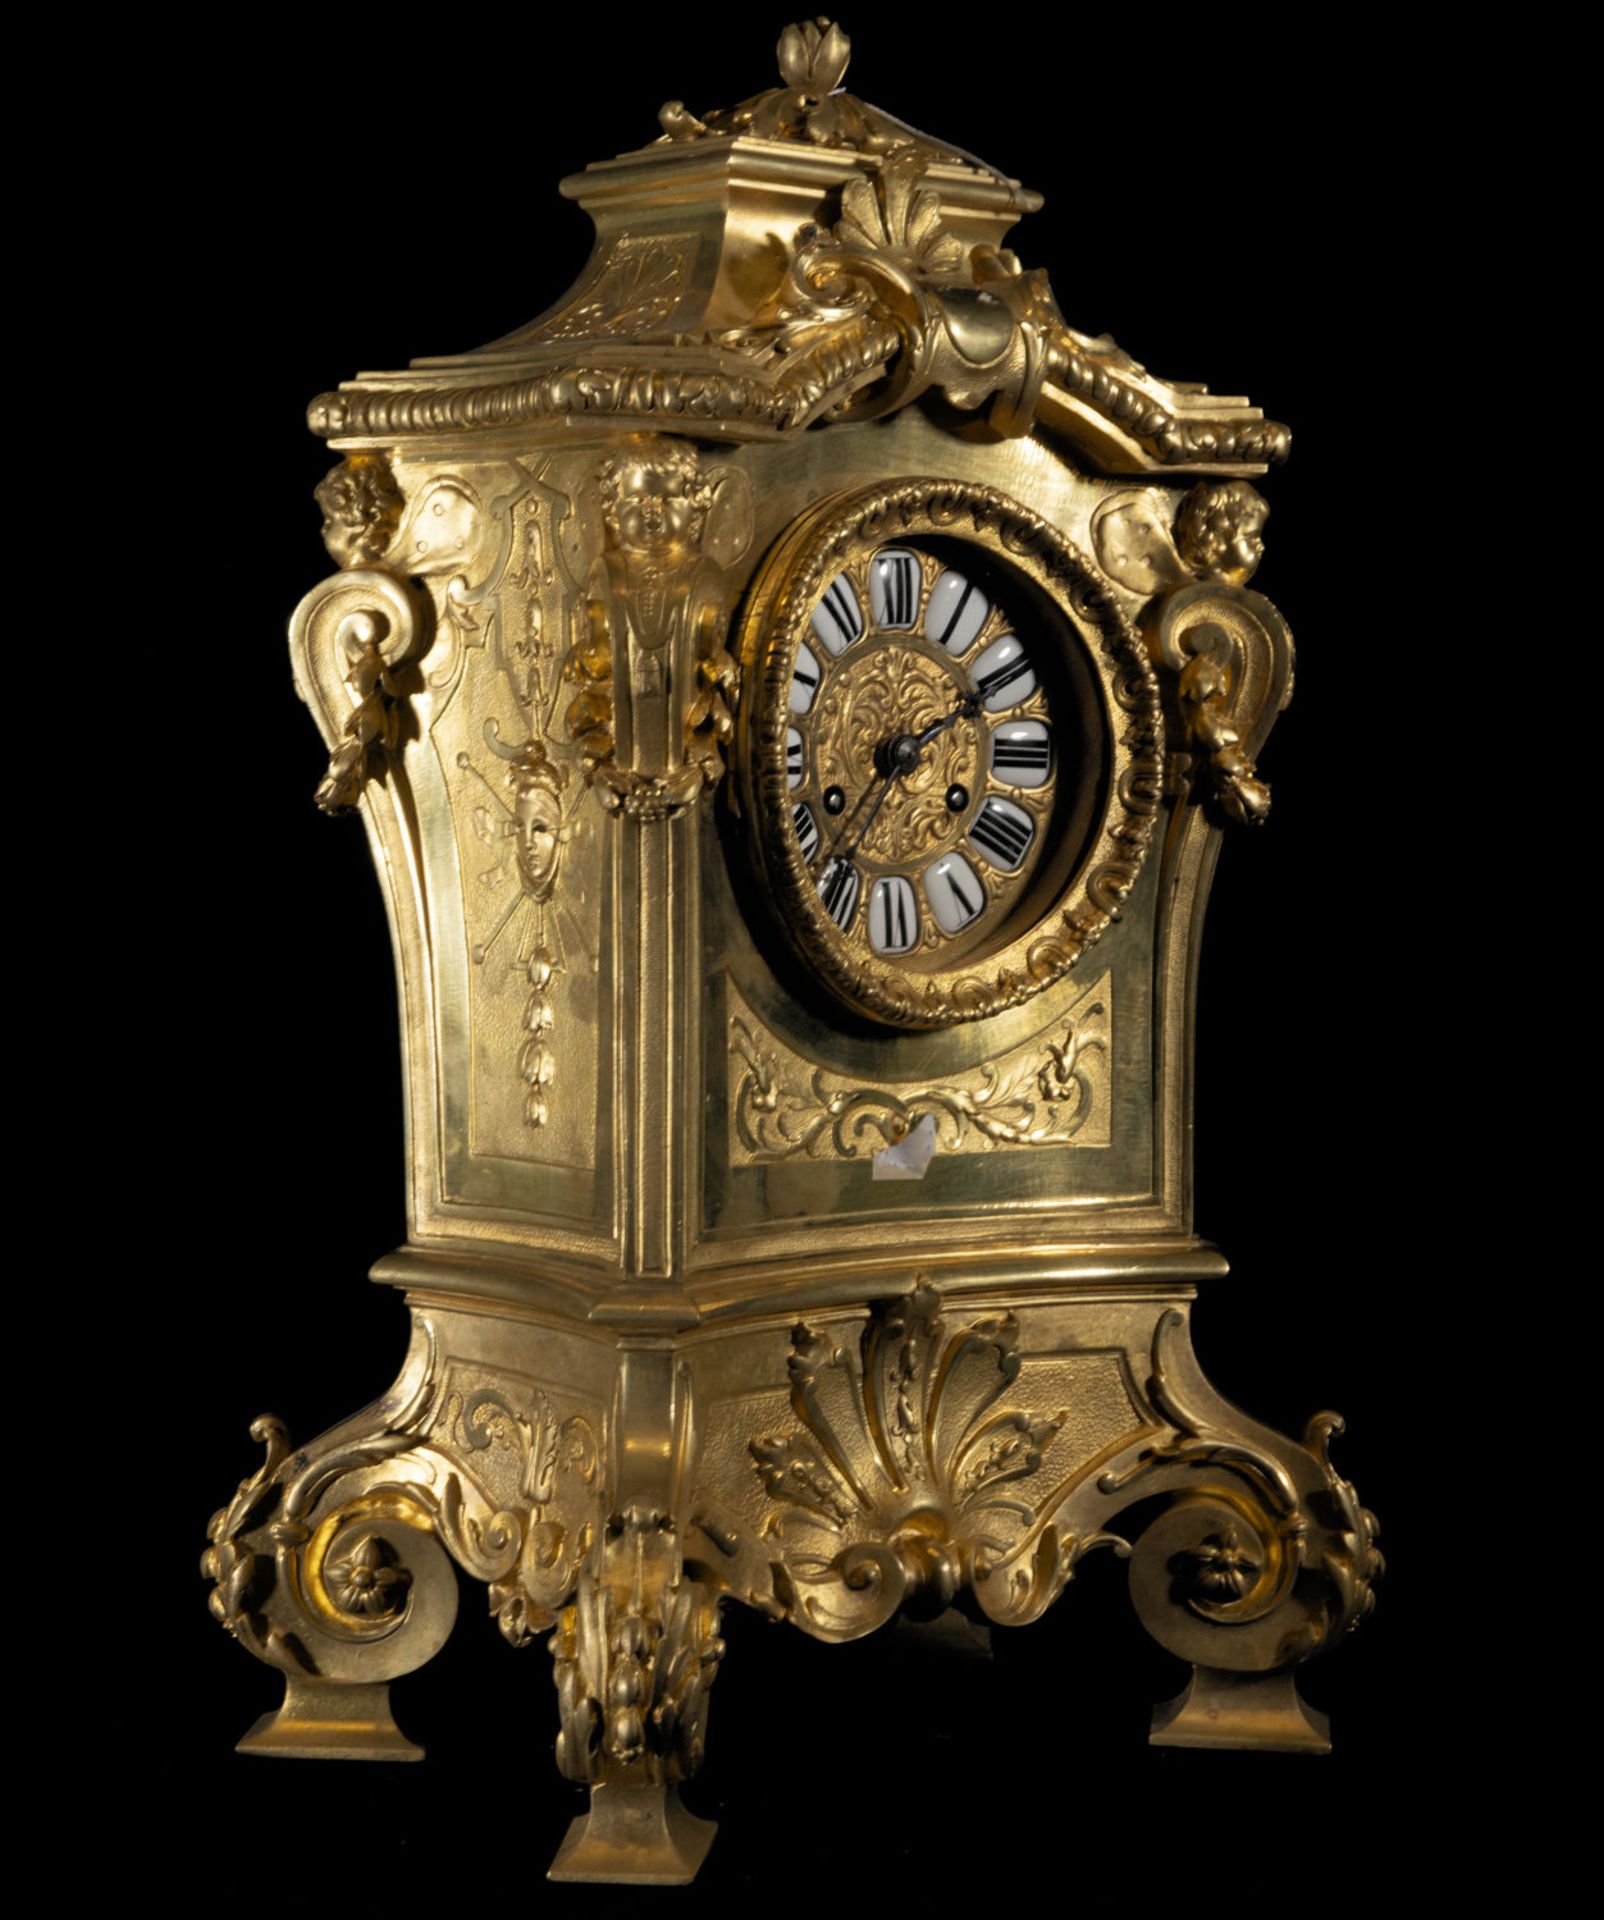 French Napoleon III Portico table clock in mercury gilded bronze from the 19th century - Image 5 of 6